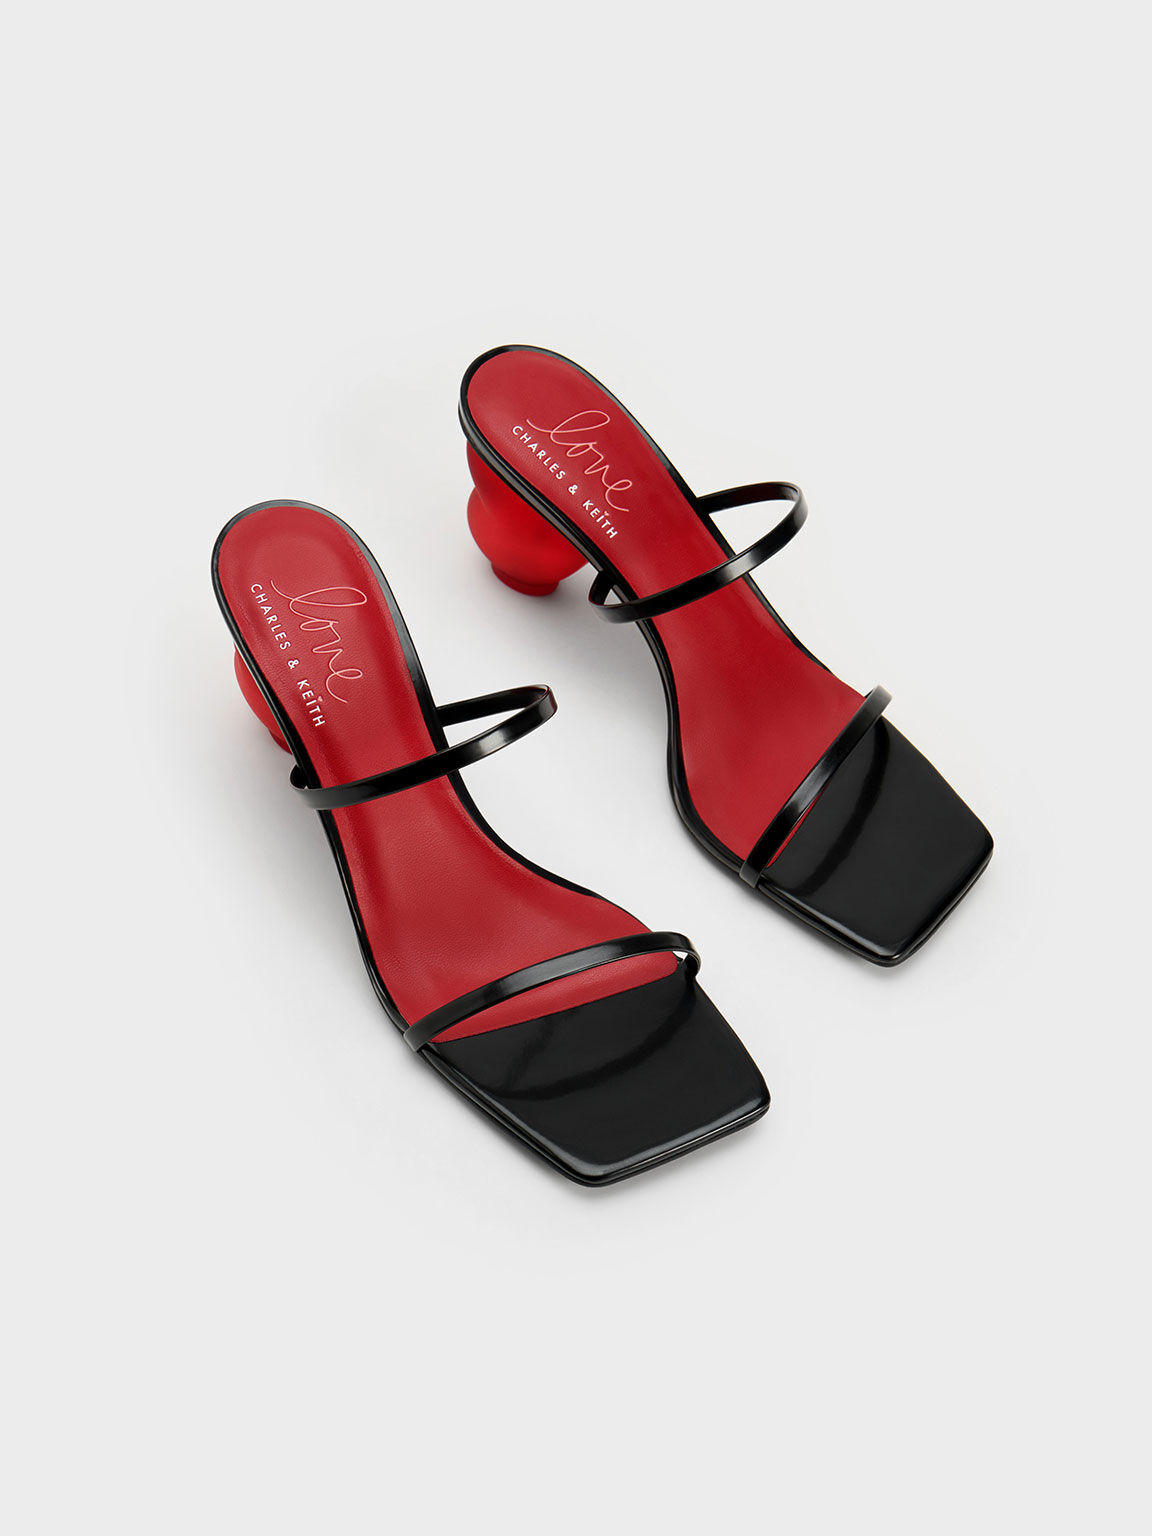 Women's Shoes | Shop Exclusive Styles | CHARLES & KEITH UK